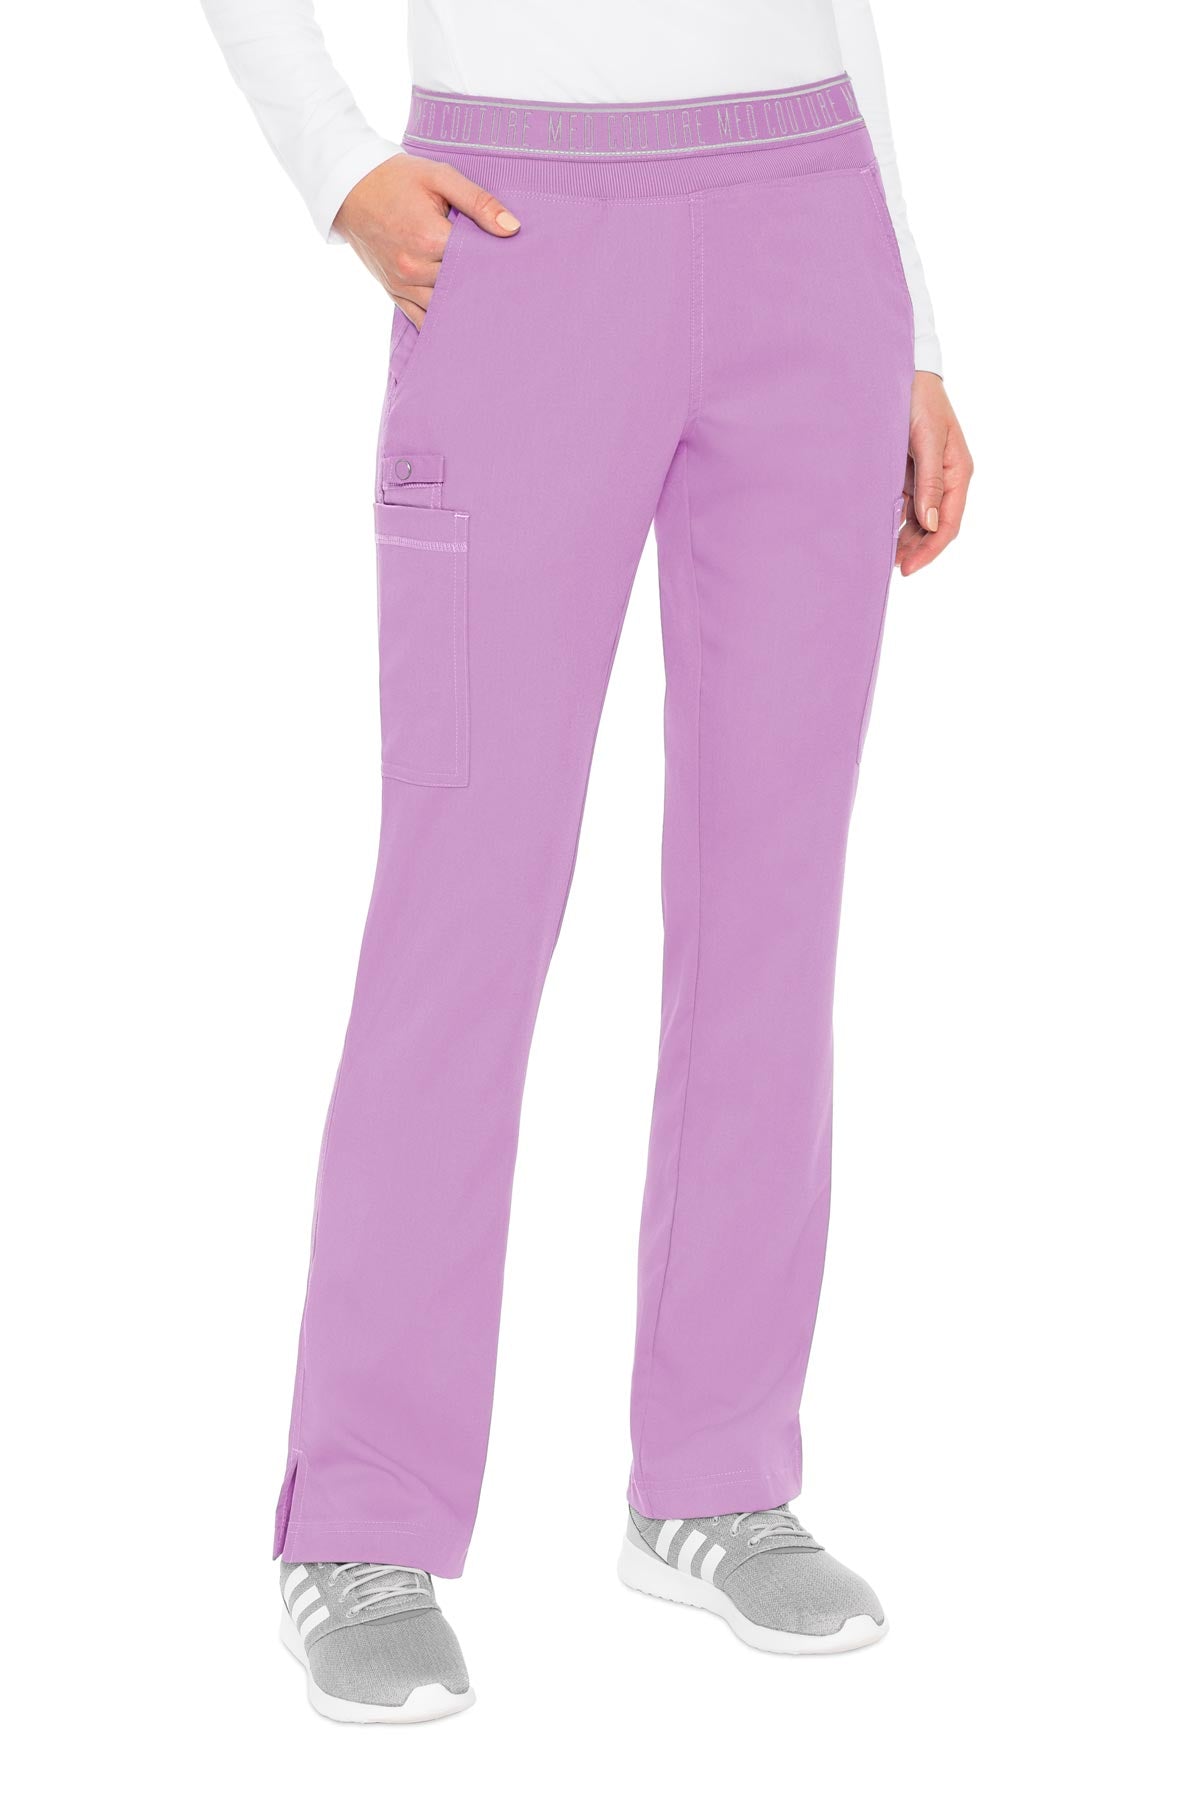 Med Couture Women's Yoga Scrub Pants (8714) With 2 Cargo Pockets 2XL C6